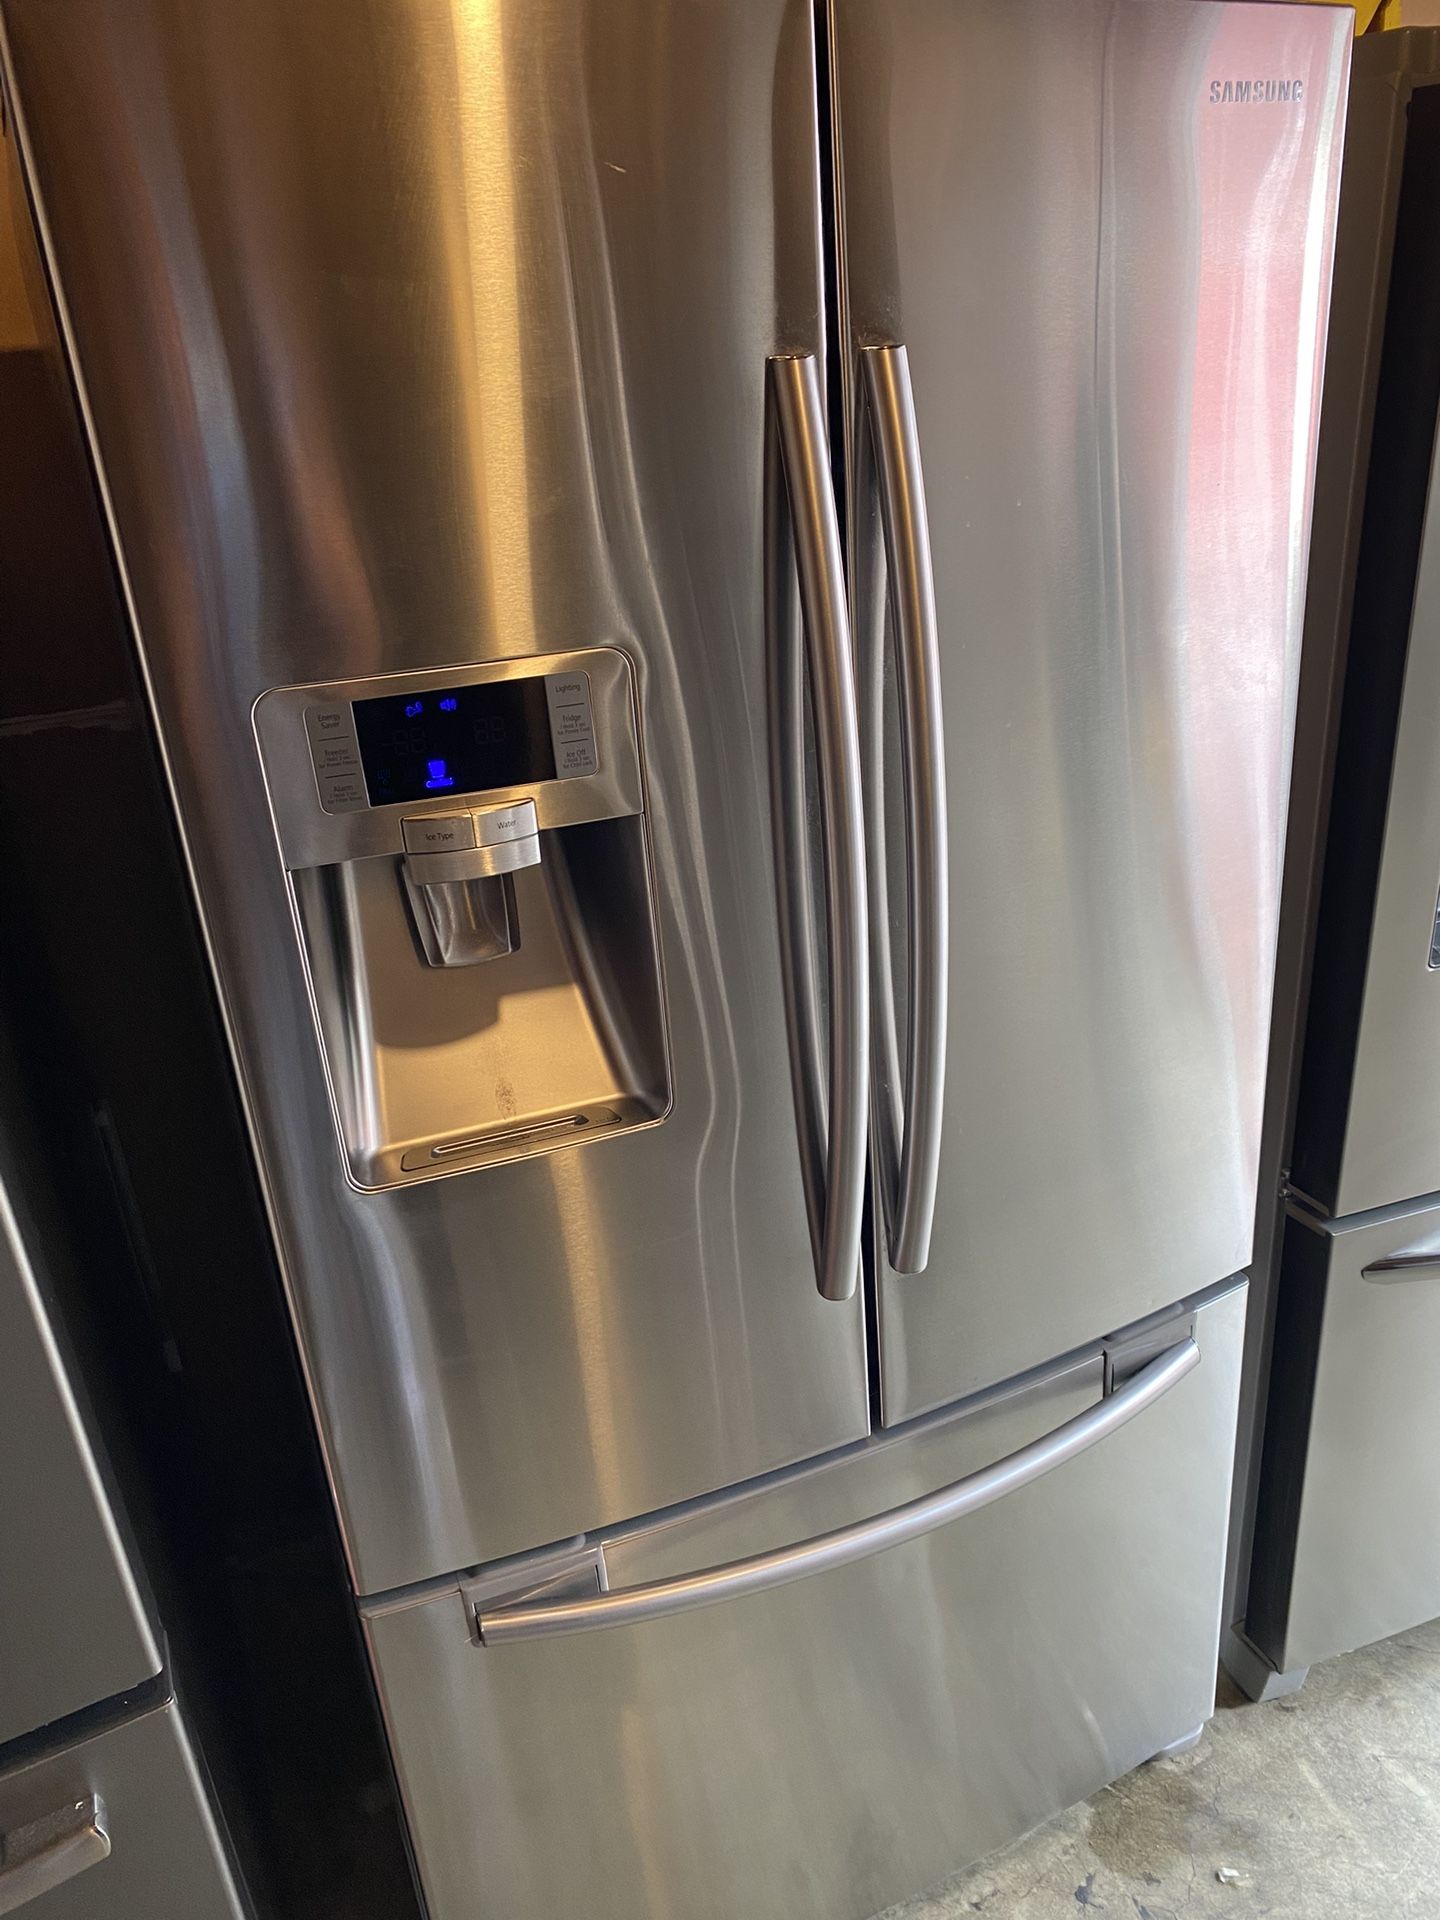 Samsung French Doors Counter Depth Stainless Steel Refrigerator 